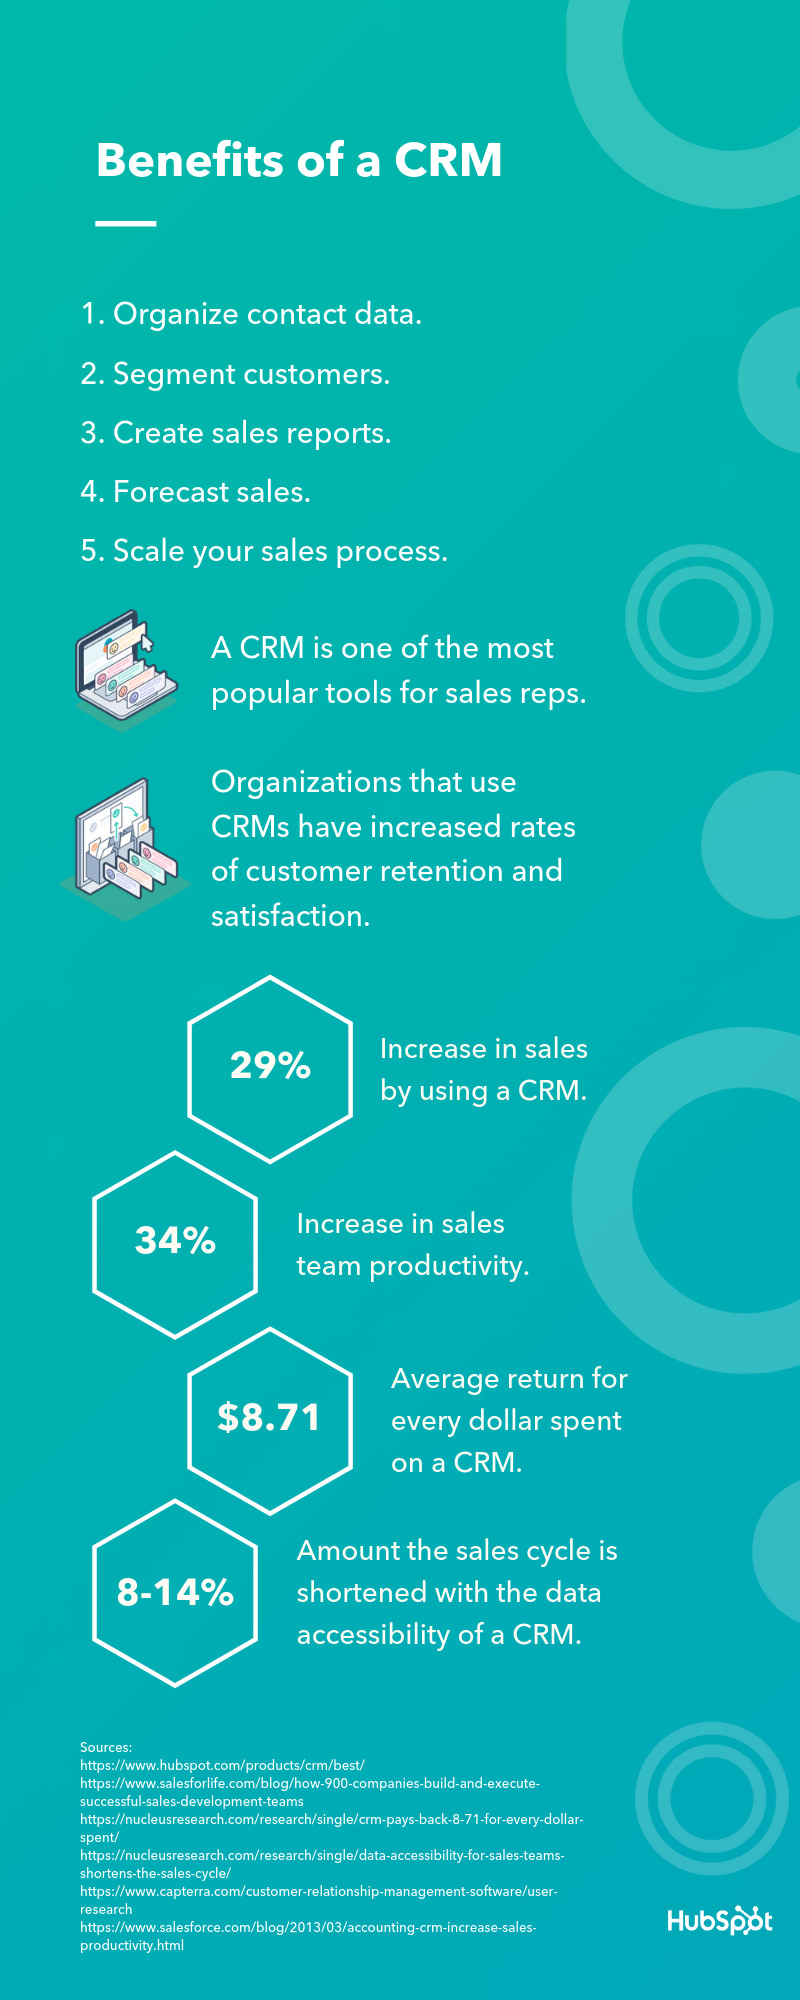 Benefits of CRM for Law Firms